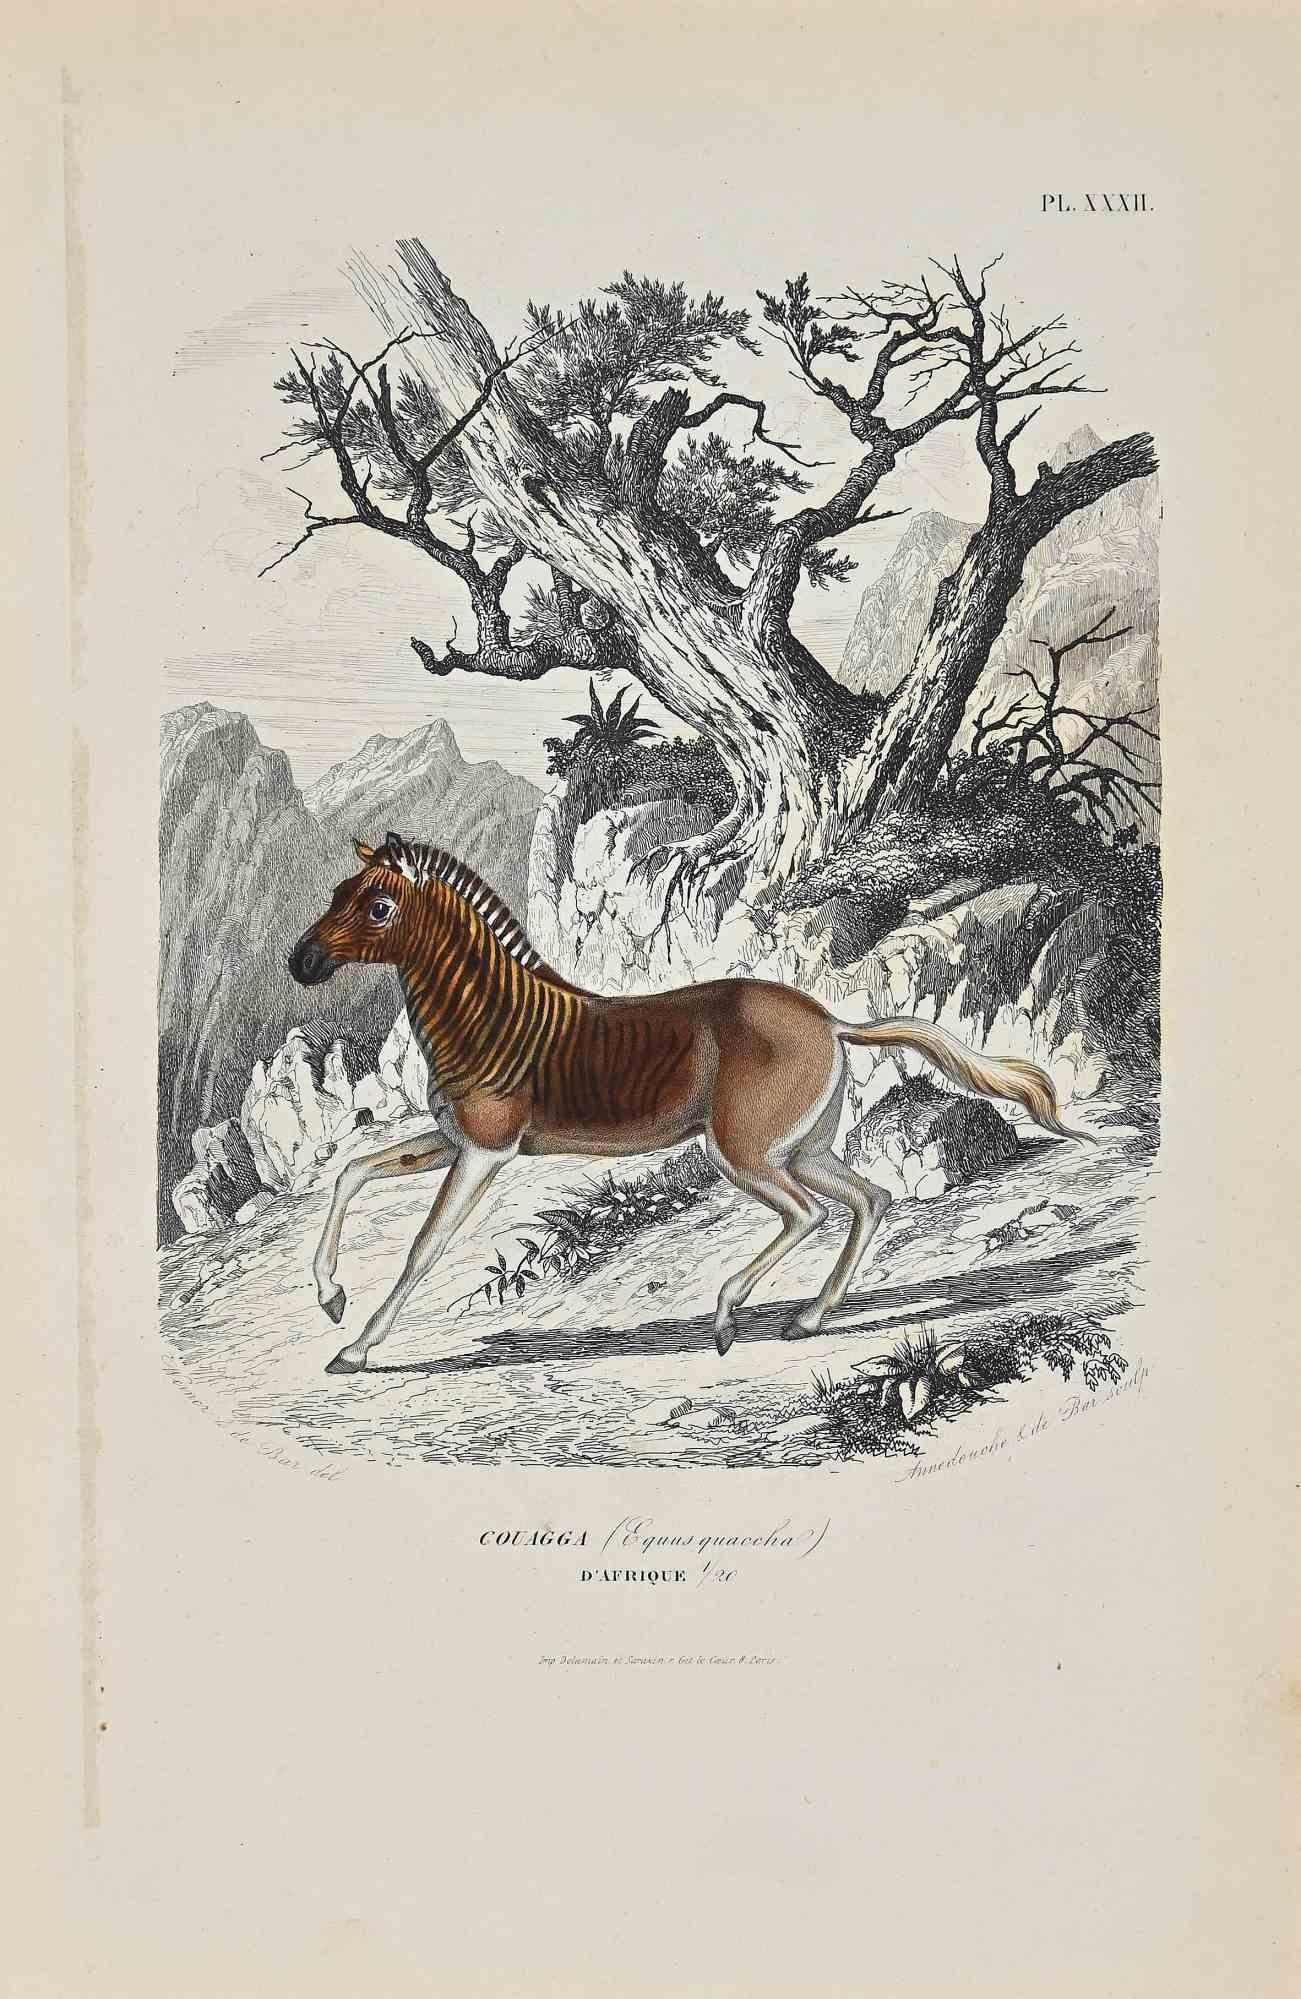 African Couagga is an original lithograph on ivory-colored paper, realized by Paul Gervais (1816-1879). The artwork is from The Series of "Les Trois Règnes de la Nature", and was published in 1854.

Good conditions except for some foxings.

Titled